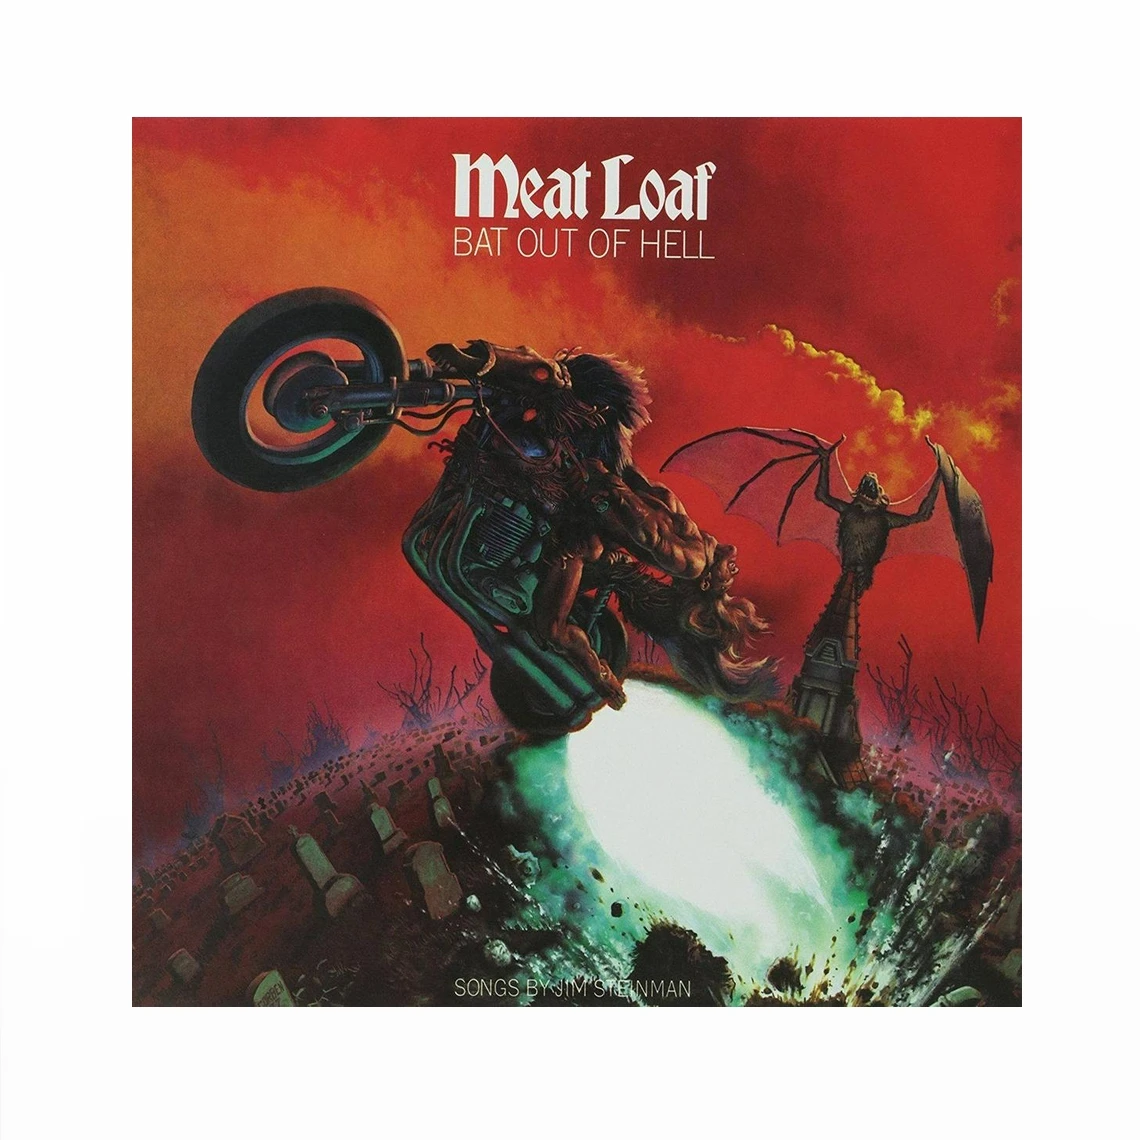 Retro Album Cover Poster Various Sizes Meatloaf  "BAT OUT OF HELL". 